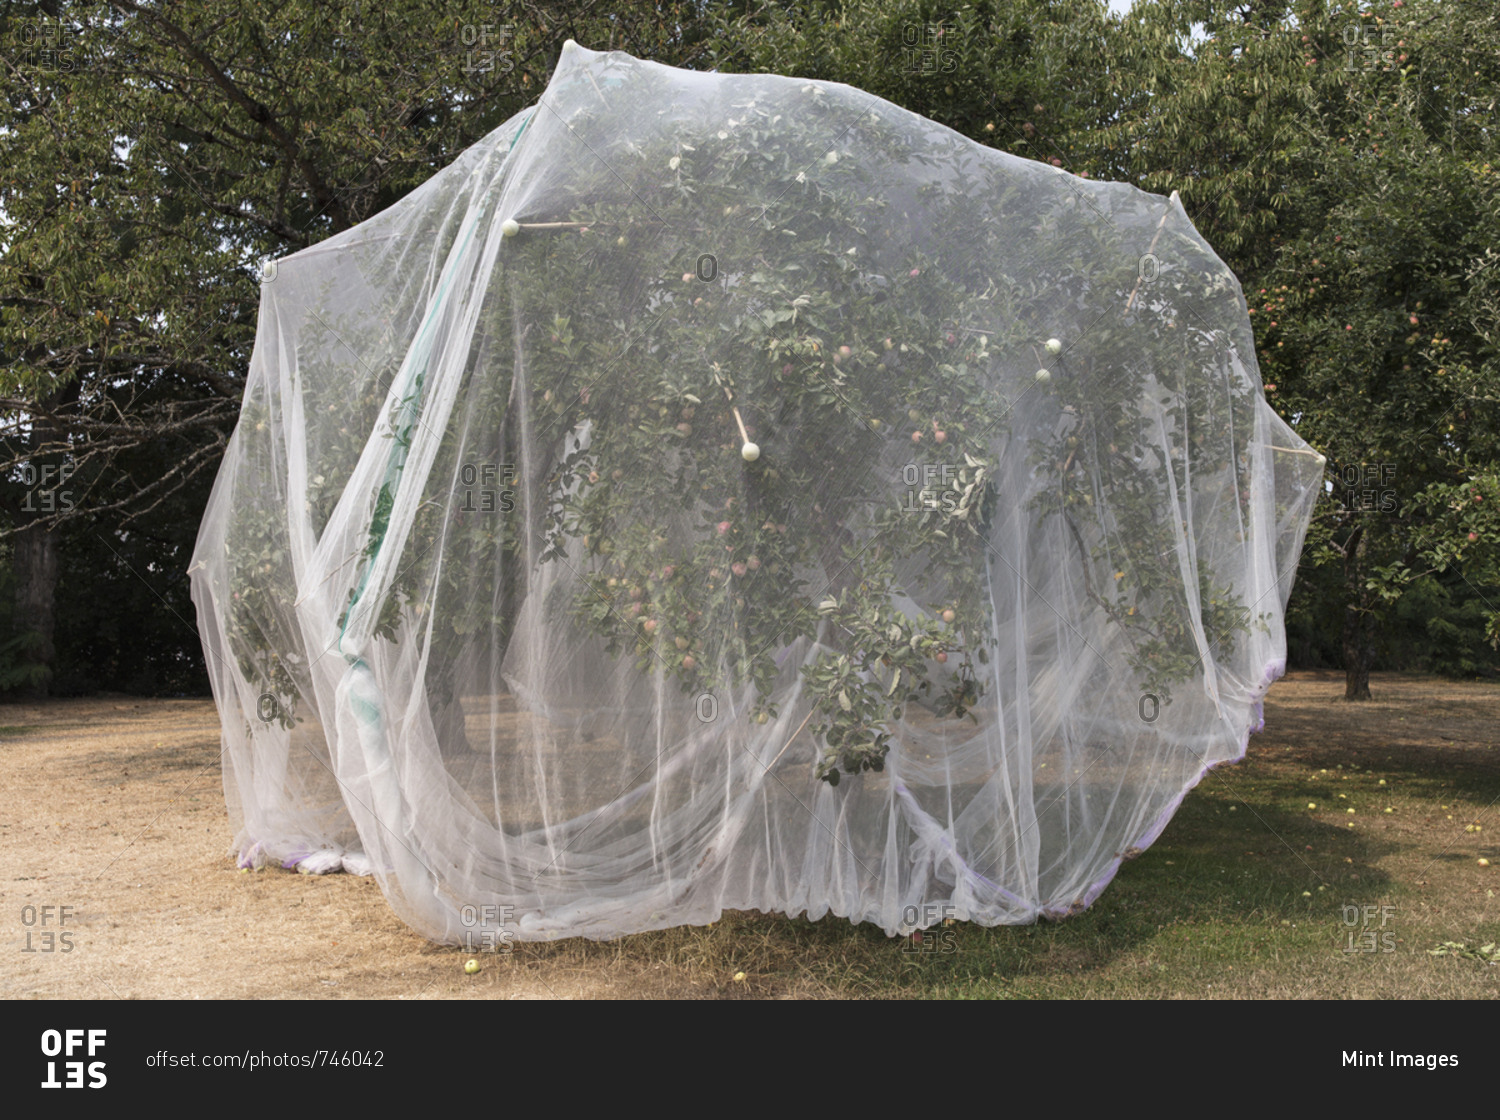 Protective mesh fabric covering apple trees bearing young fruit in summer in a commercial orchard. Pesticide-free farming and food production.